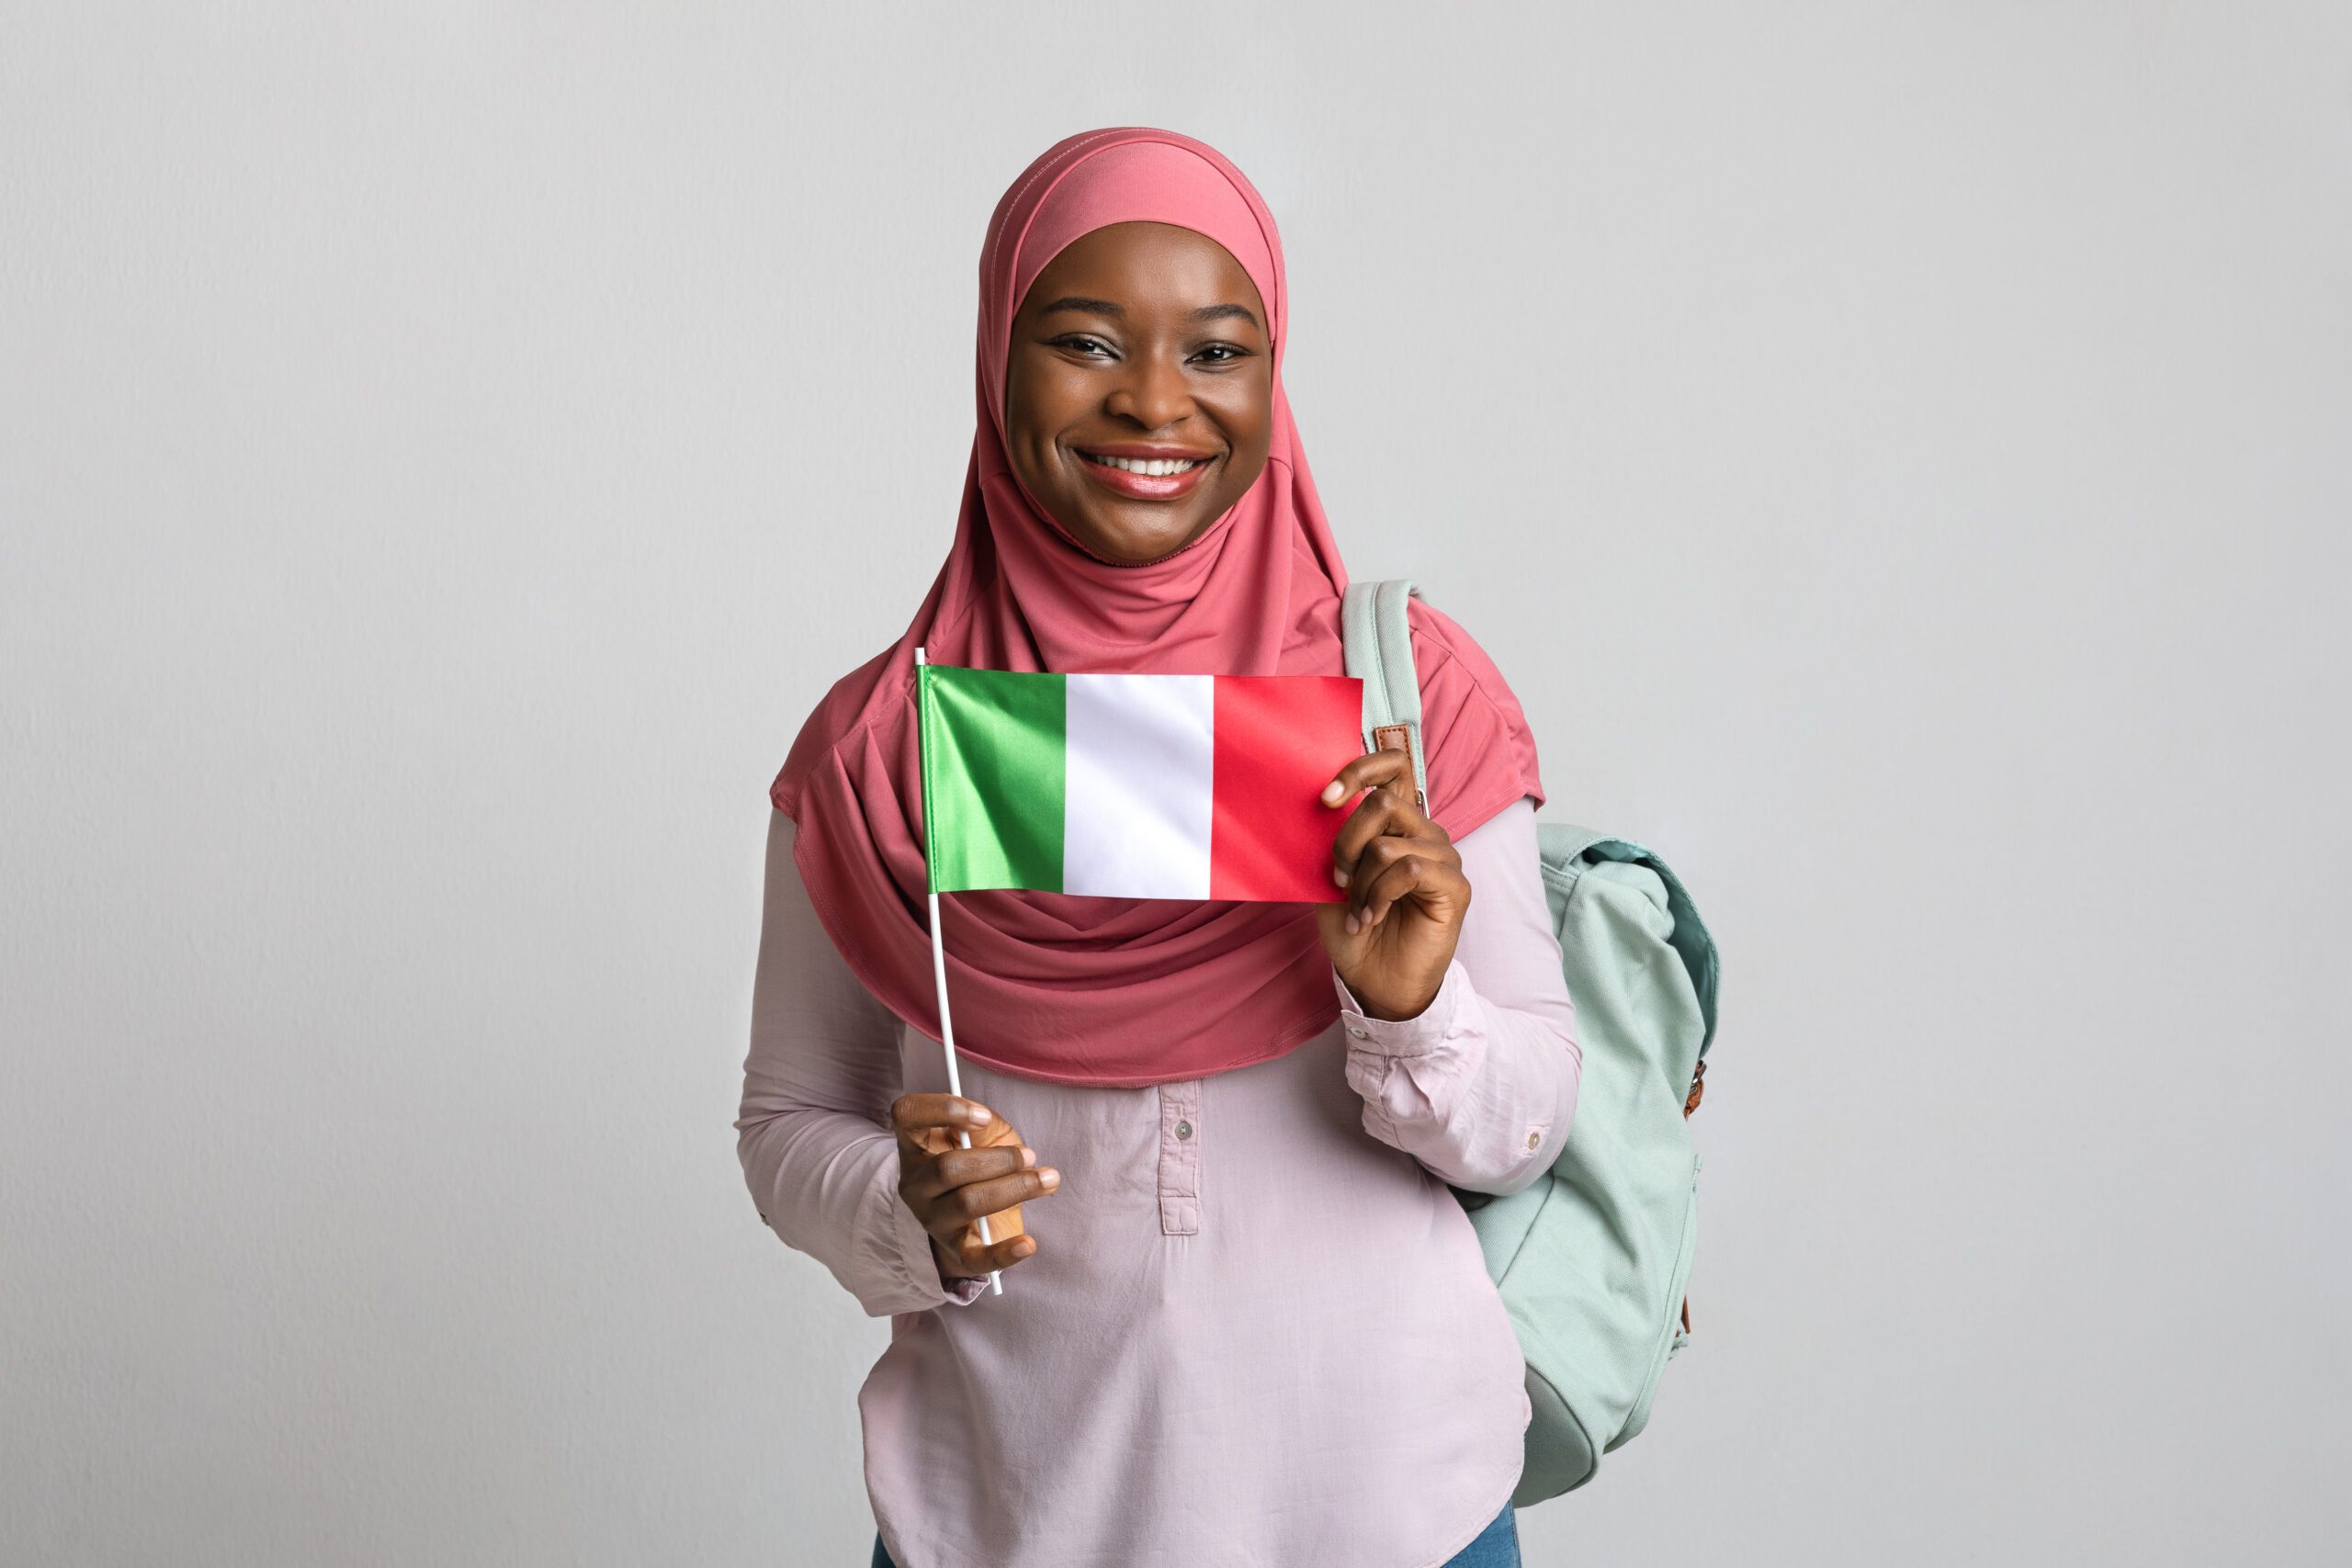 Italian citizenship | Positive black woman in hijab showing flag of Italy